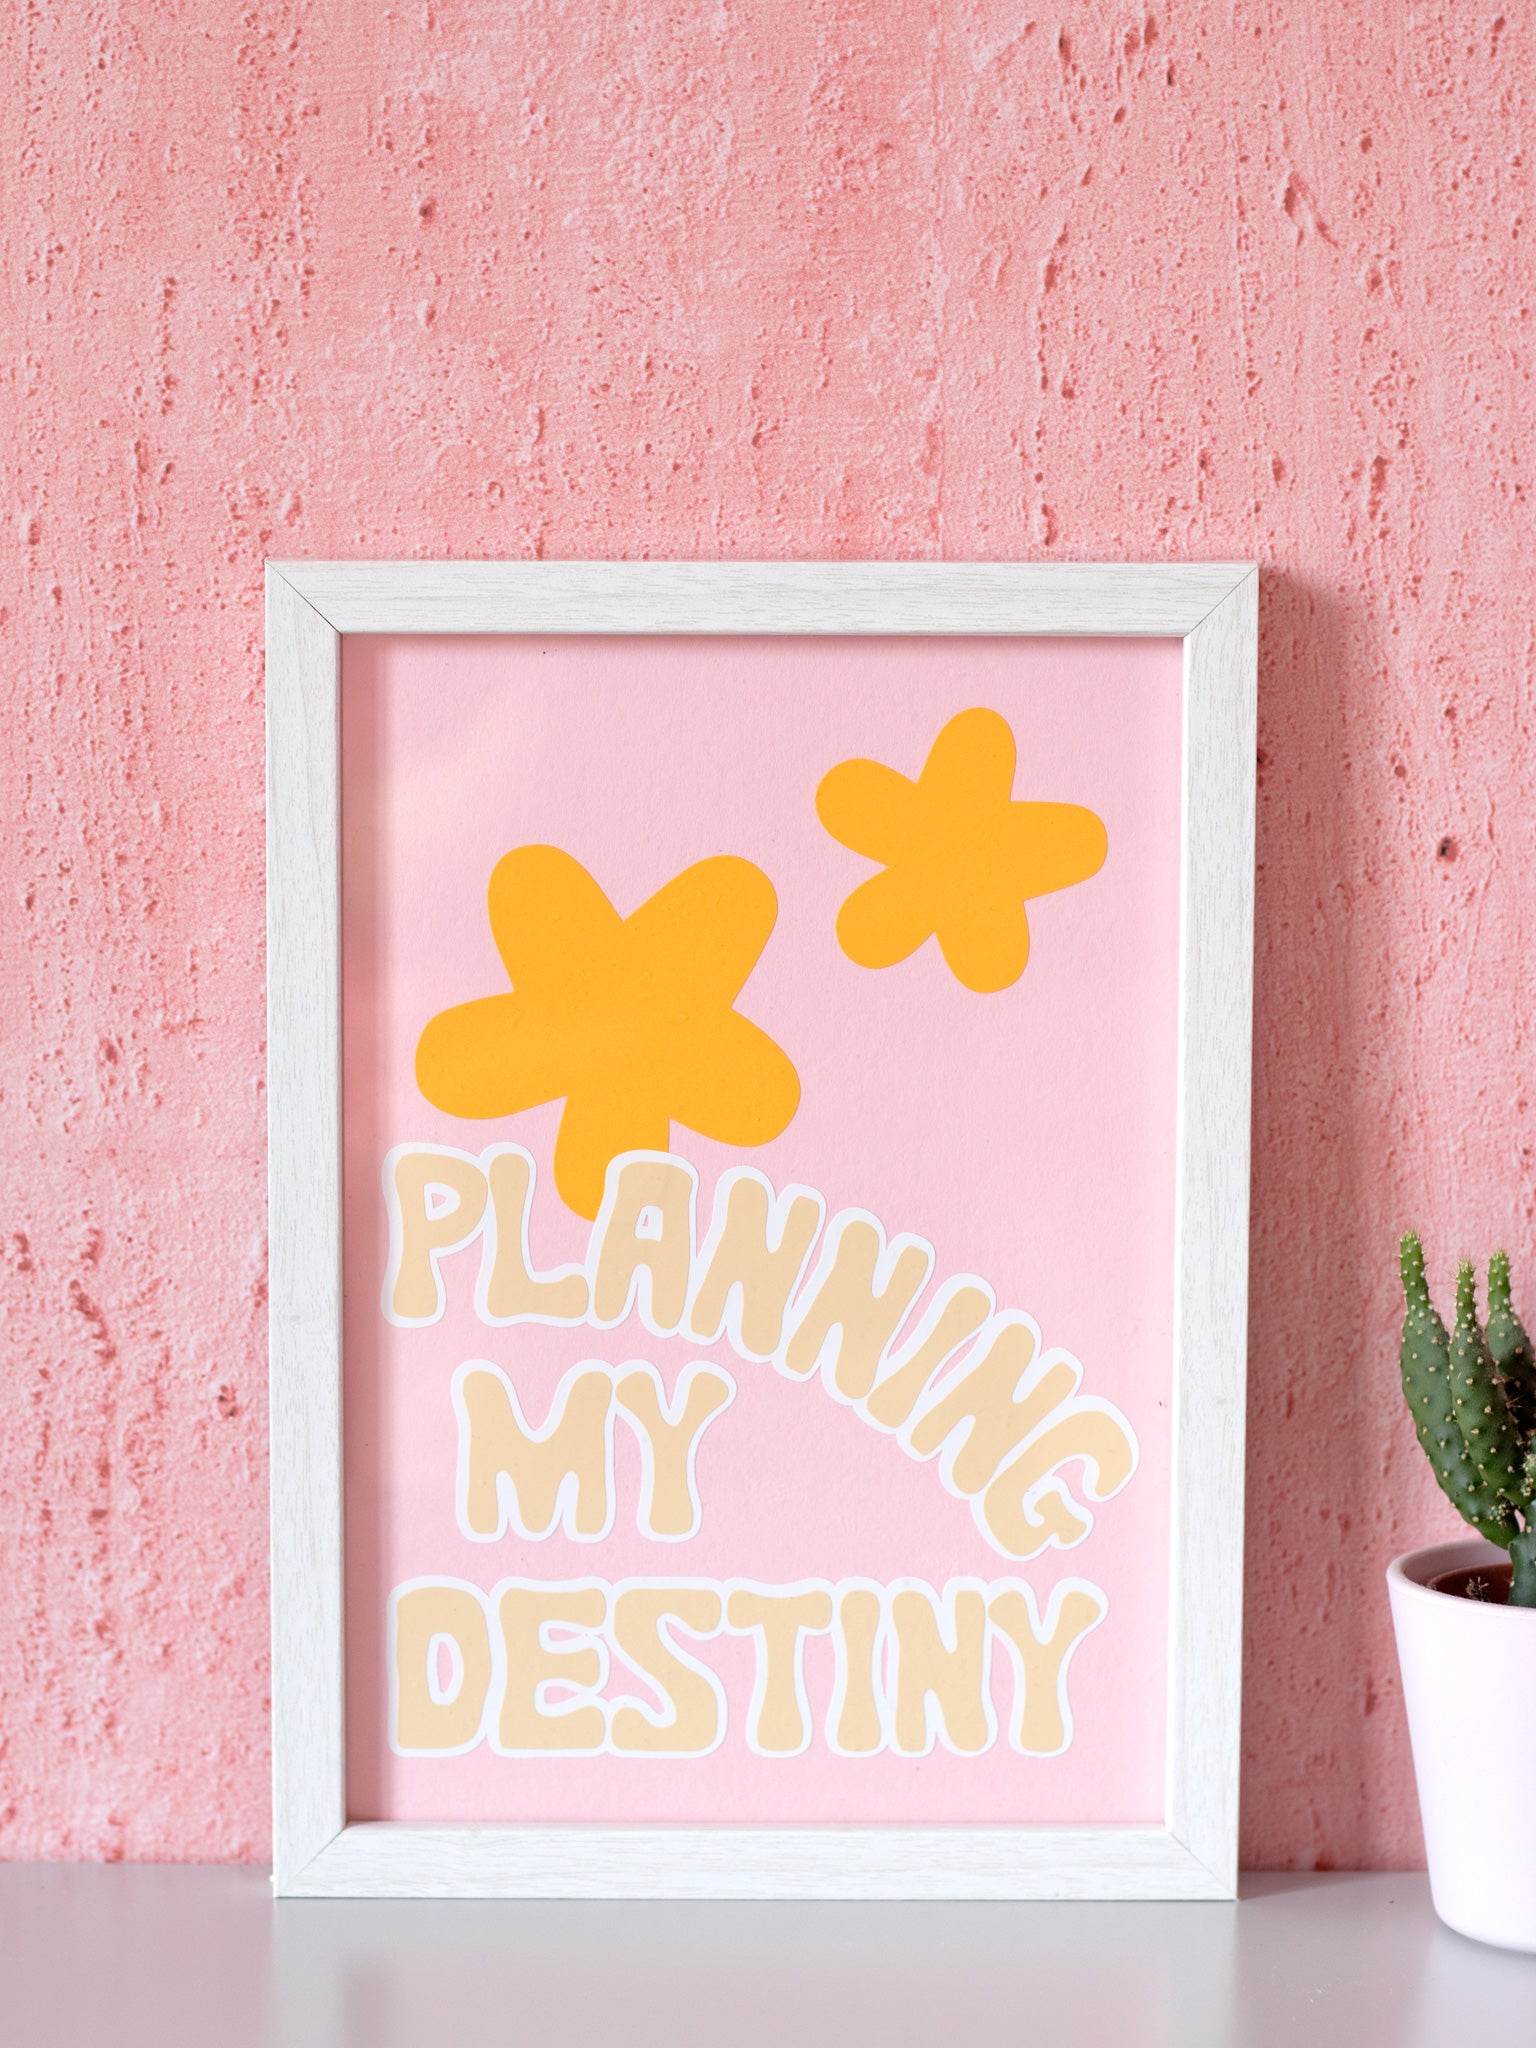 Planning my destiny art print framed in front of a pink textured wall.